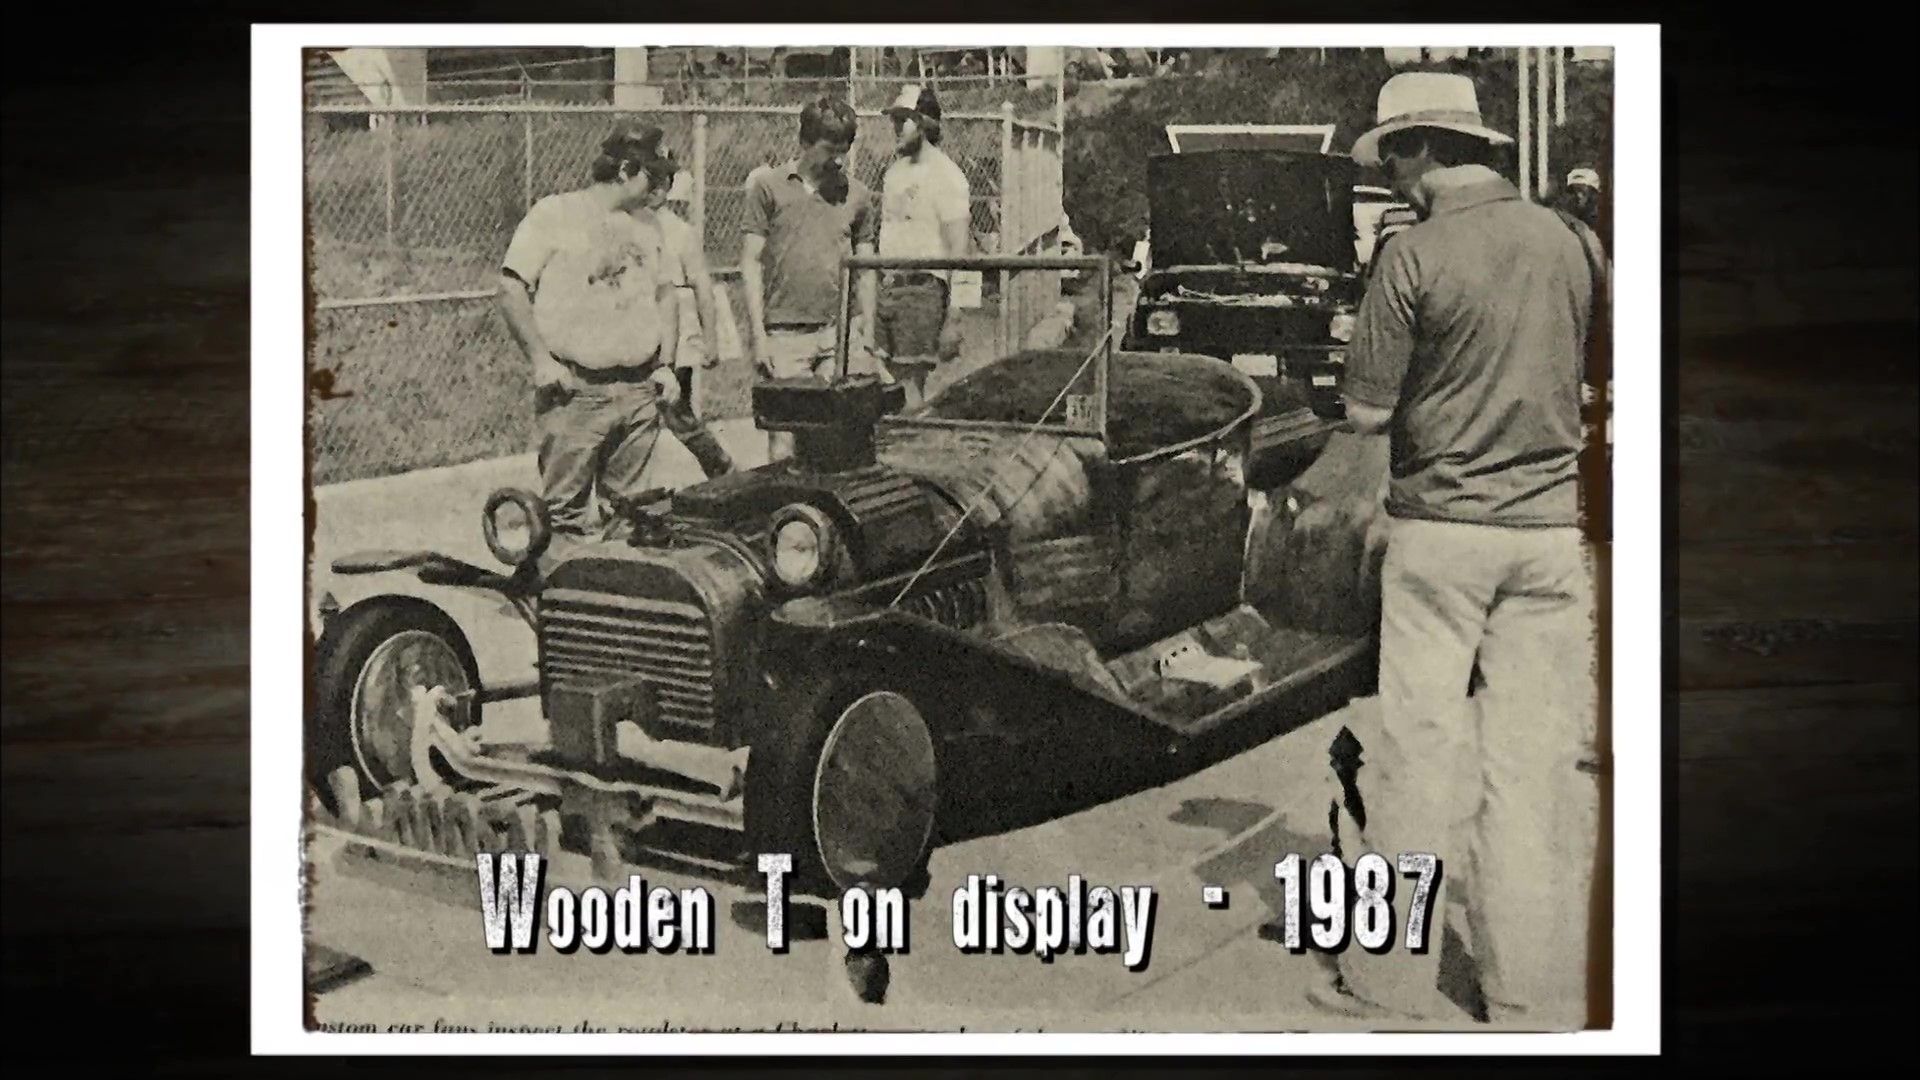 People admire the Wooden-T at an Auto-Show in 1987